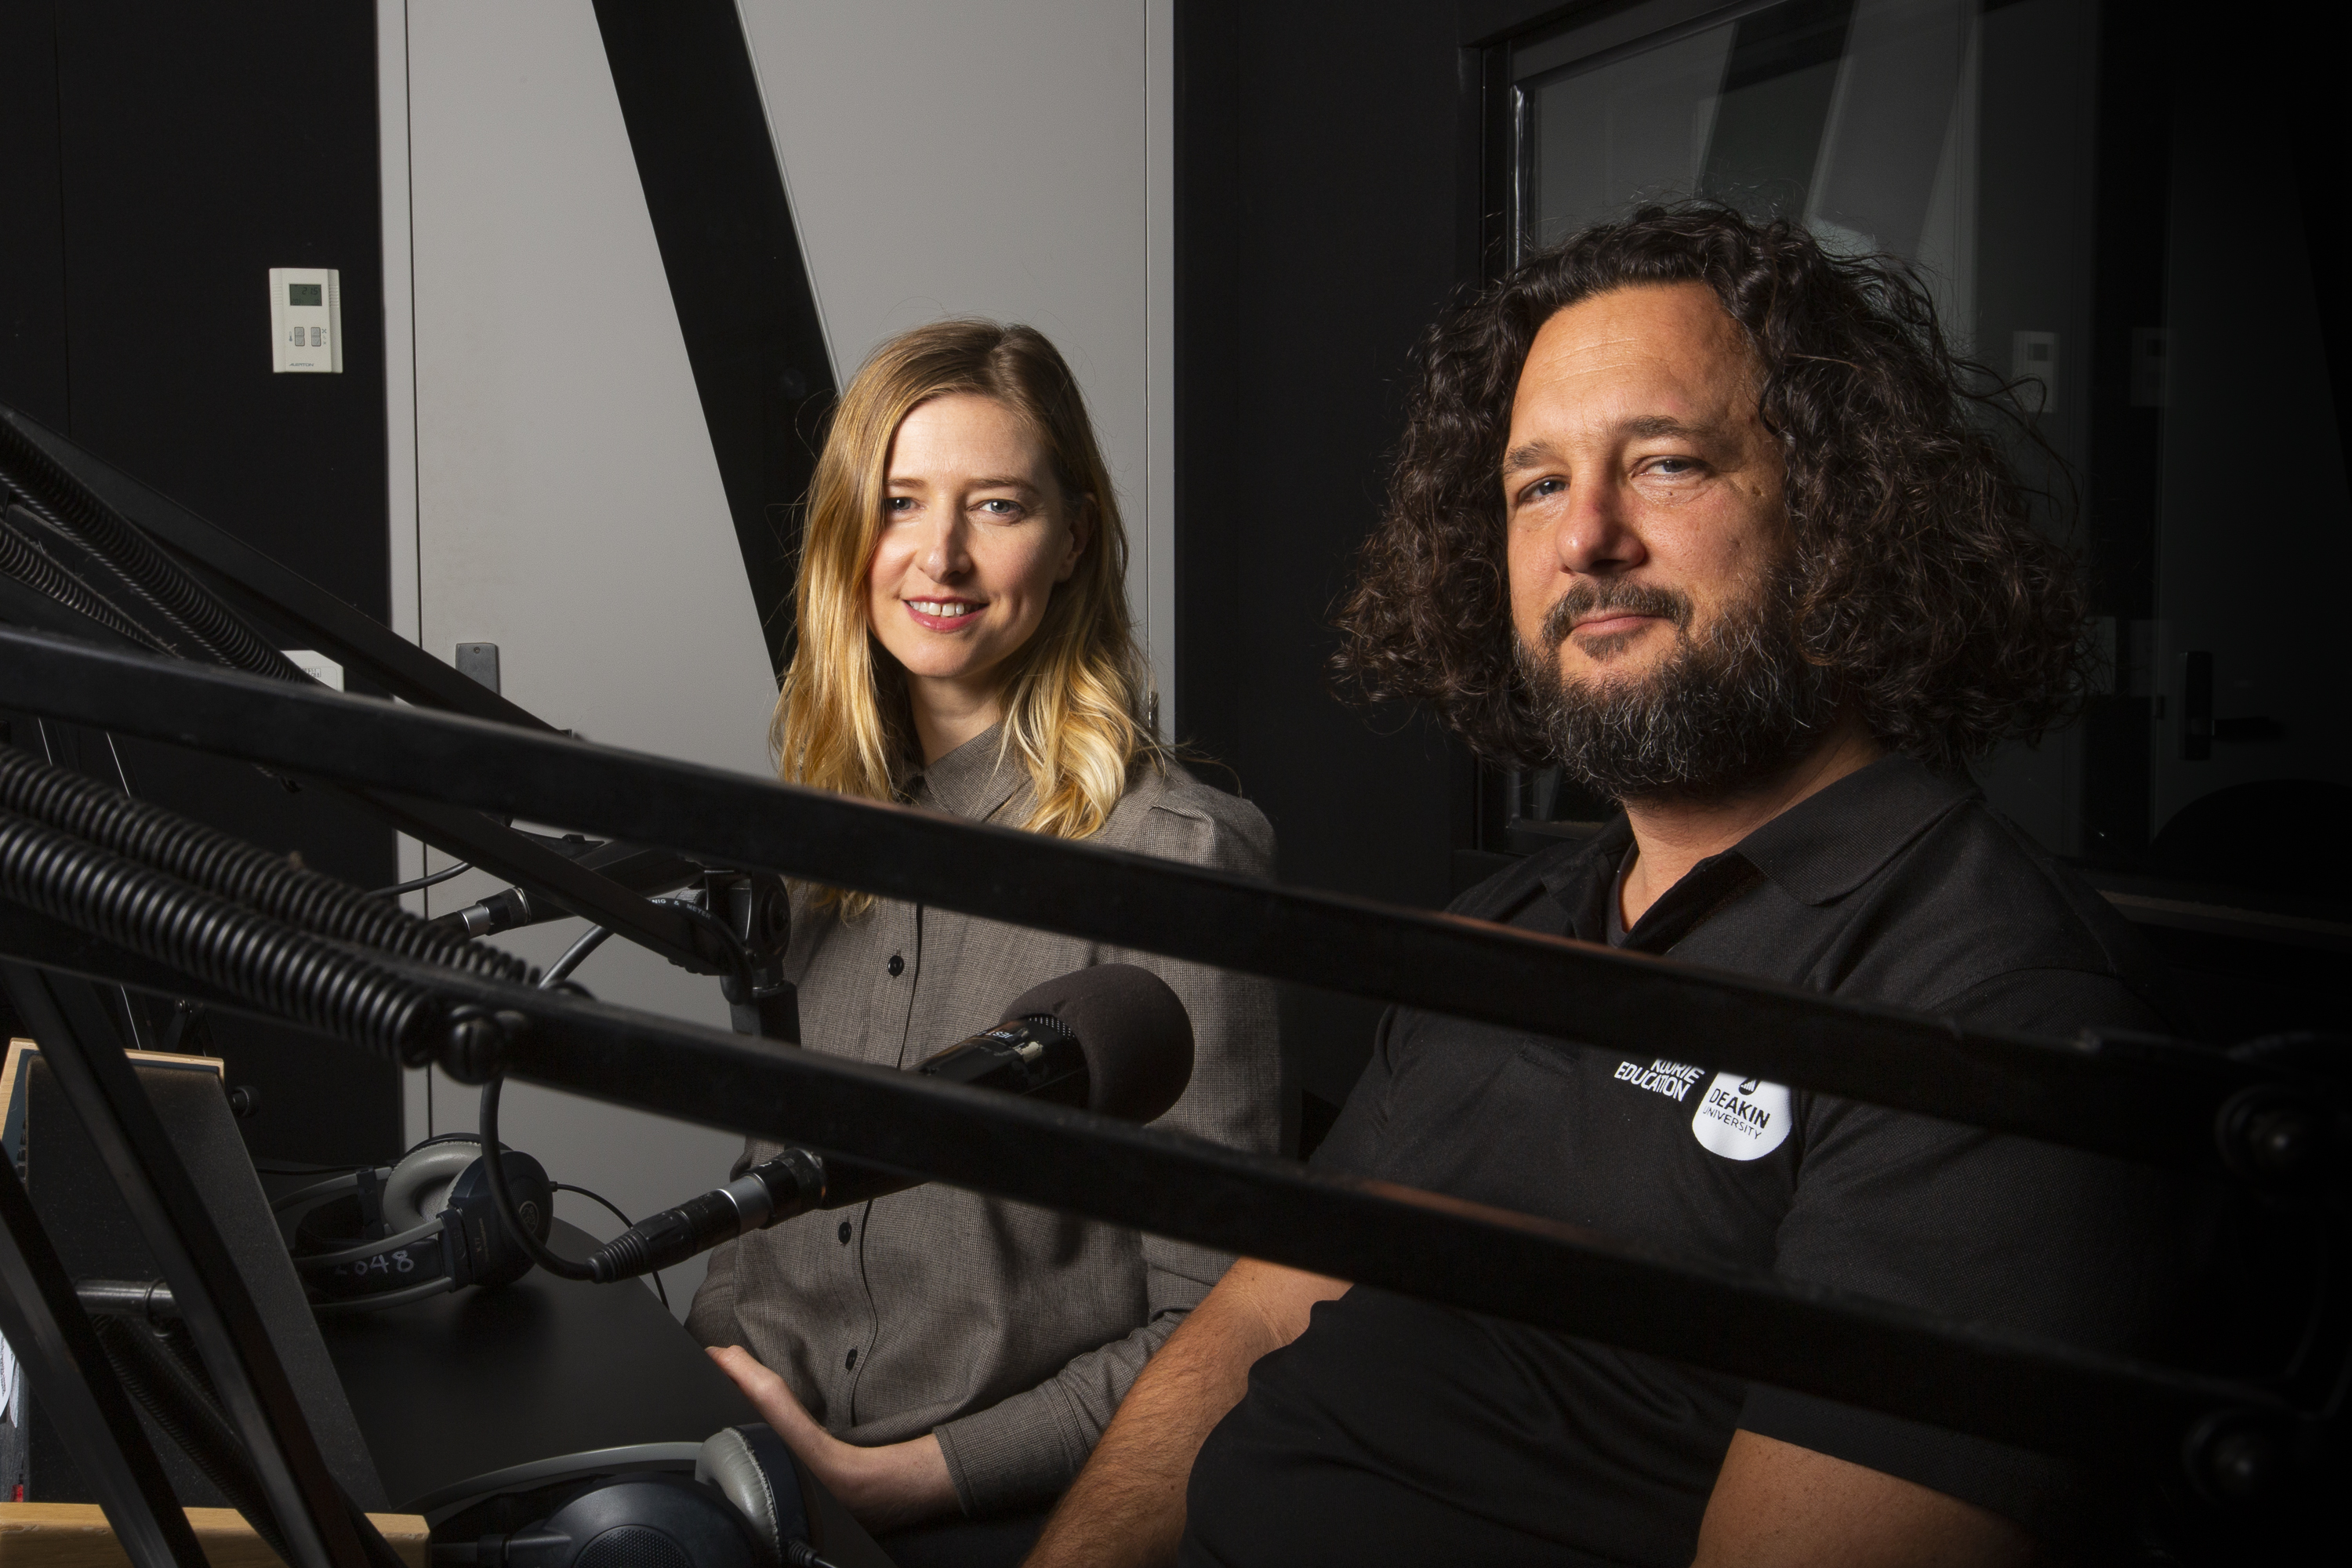 Disconnect podcast co-hosts Ellie Rennie and Tyson Yunkaporta in the studio.